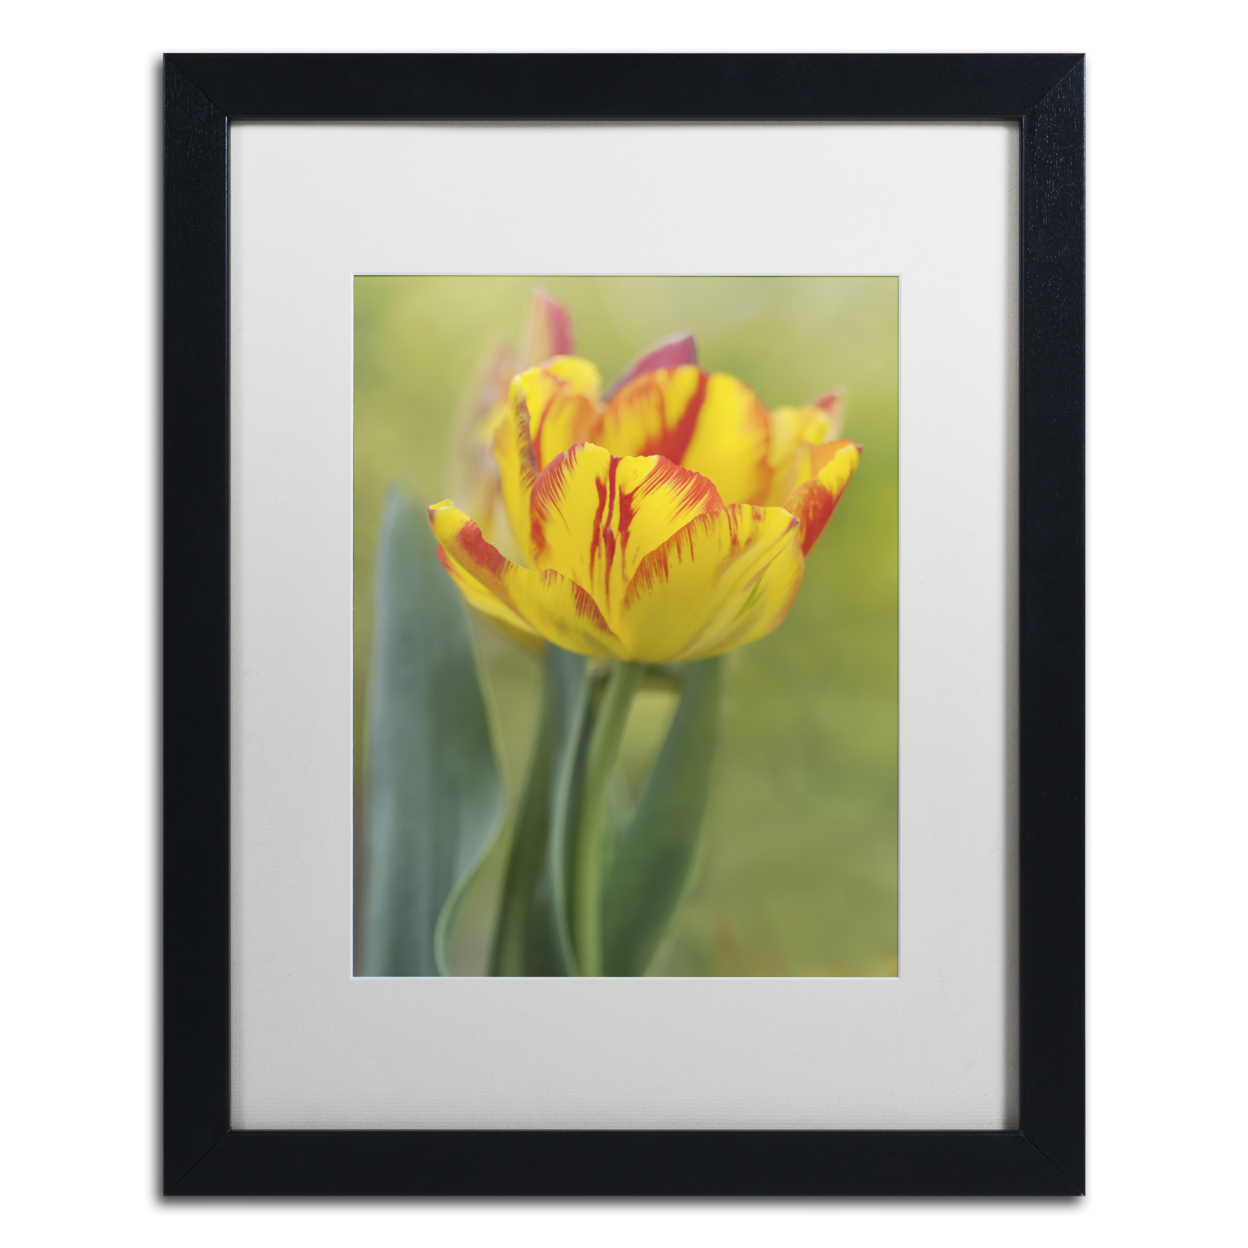 Cora Niele 'Rembrandt Tulip' Black Wooden Framed Art 18 X 22 Inches